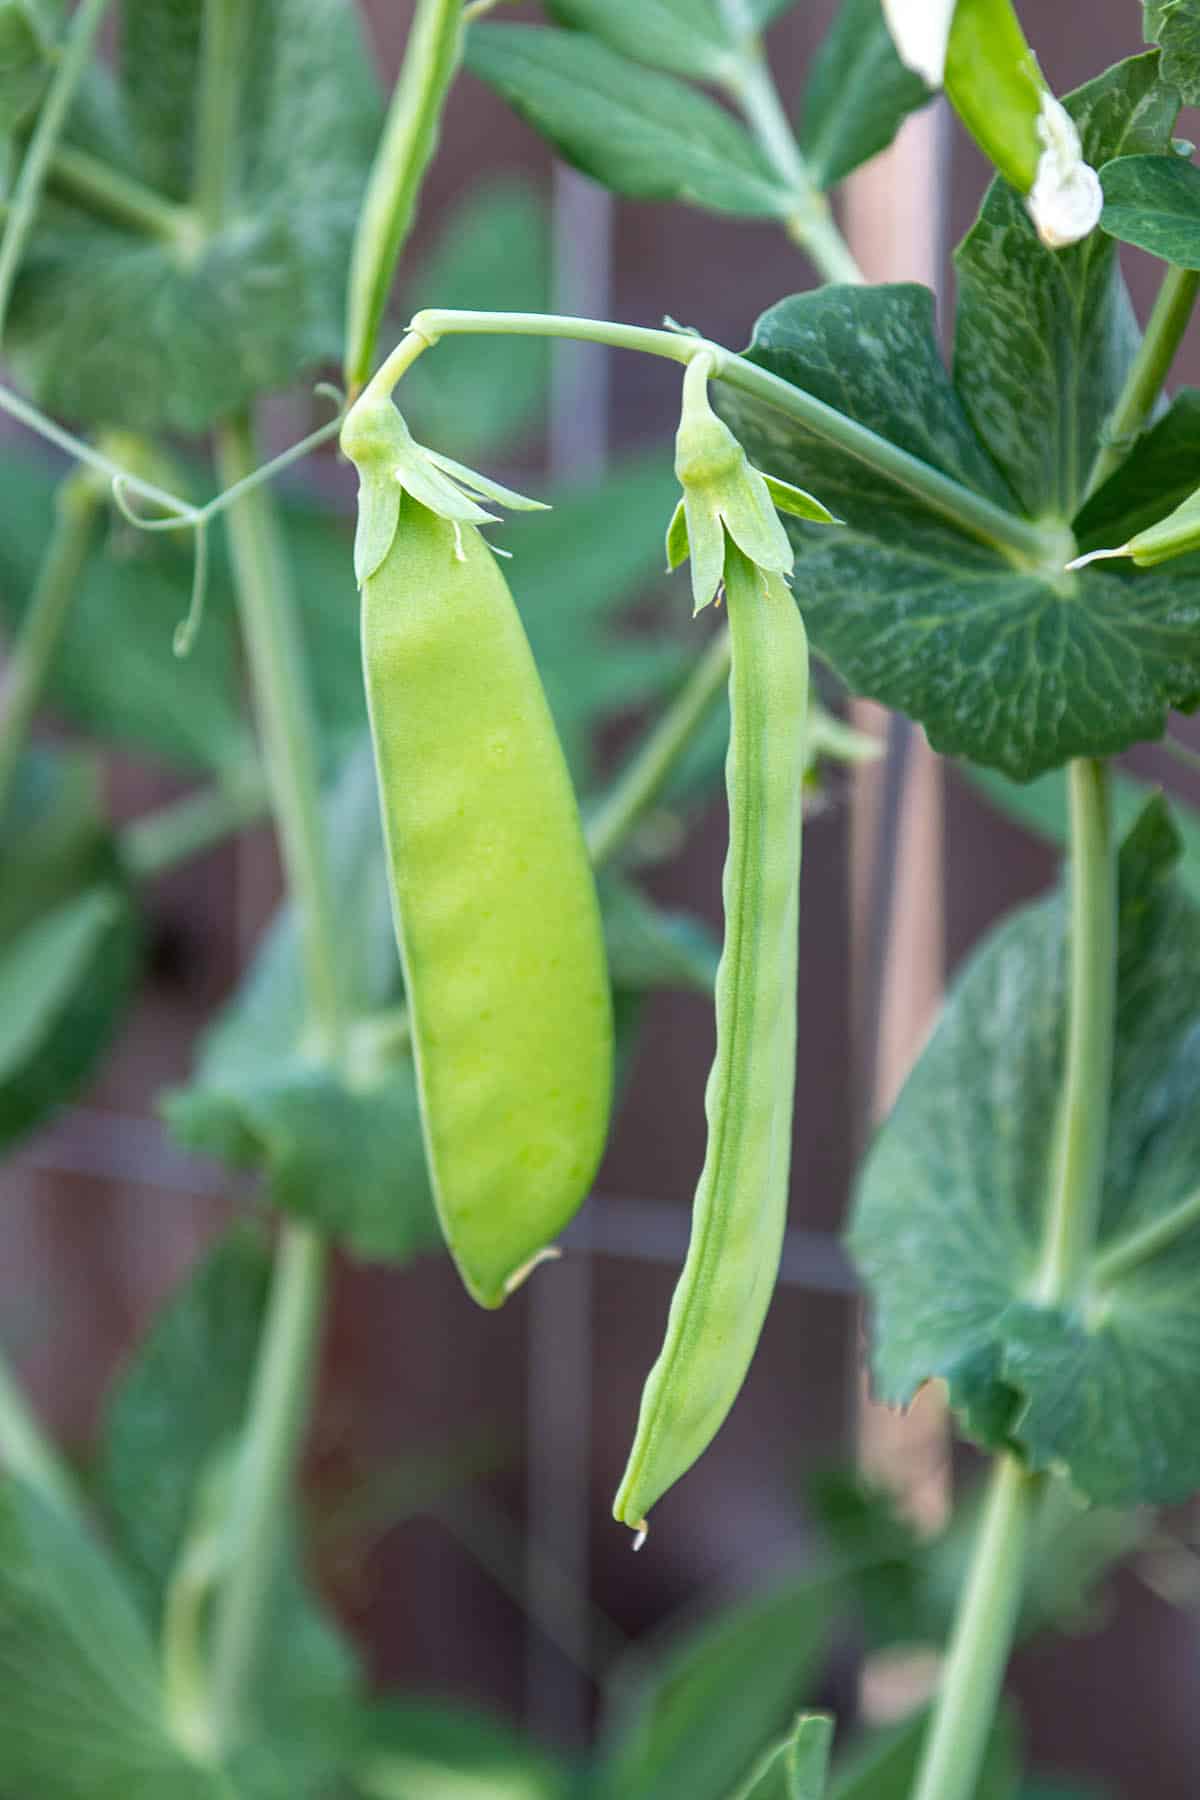 Two snow peas on a pea plant.